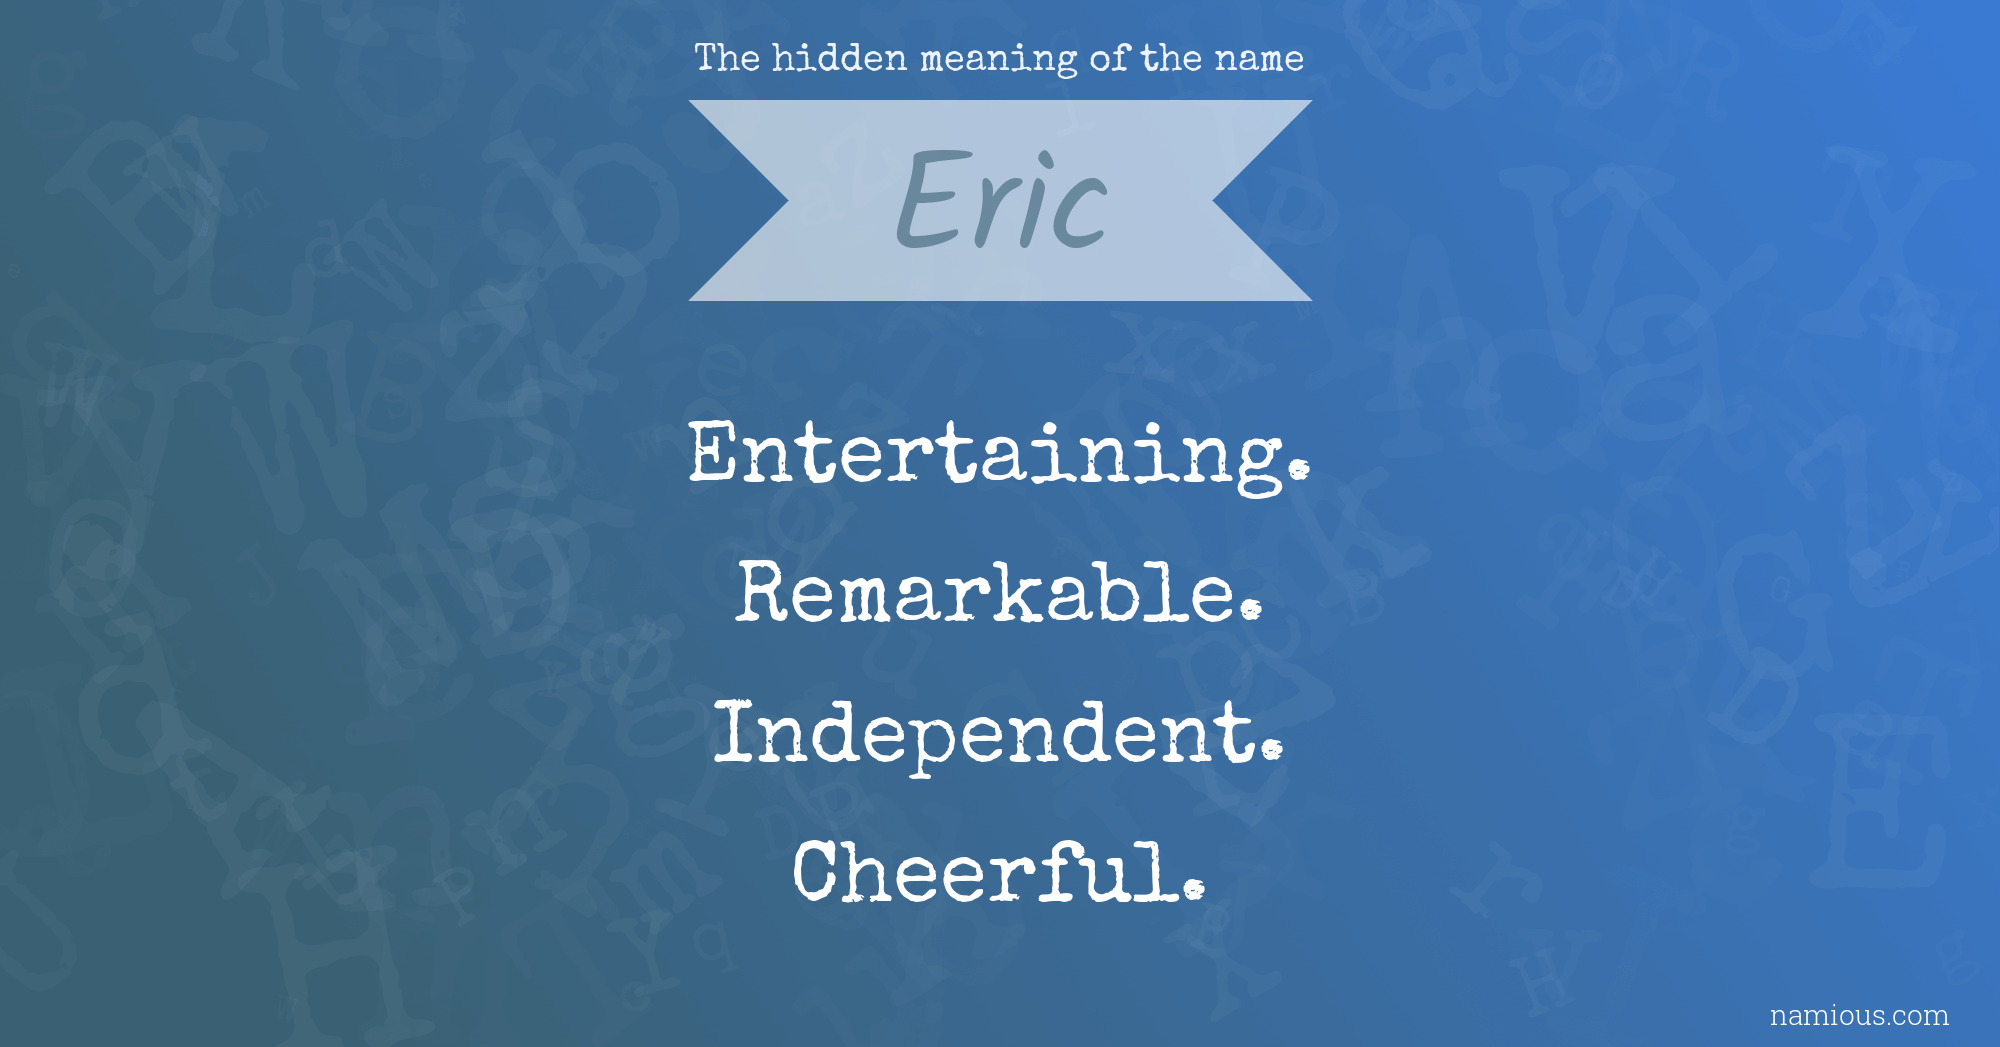 The hidden meaning of the name Eric